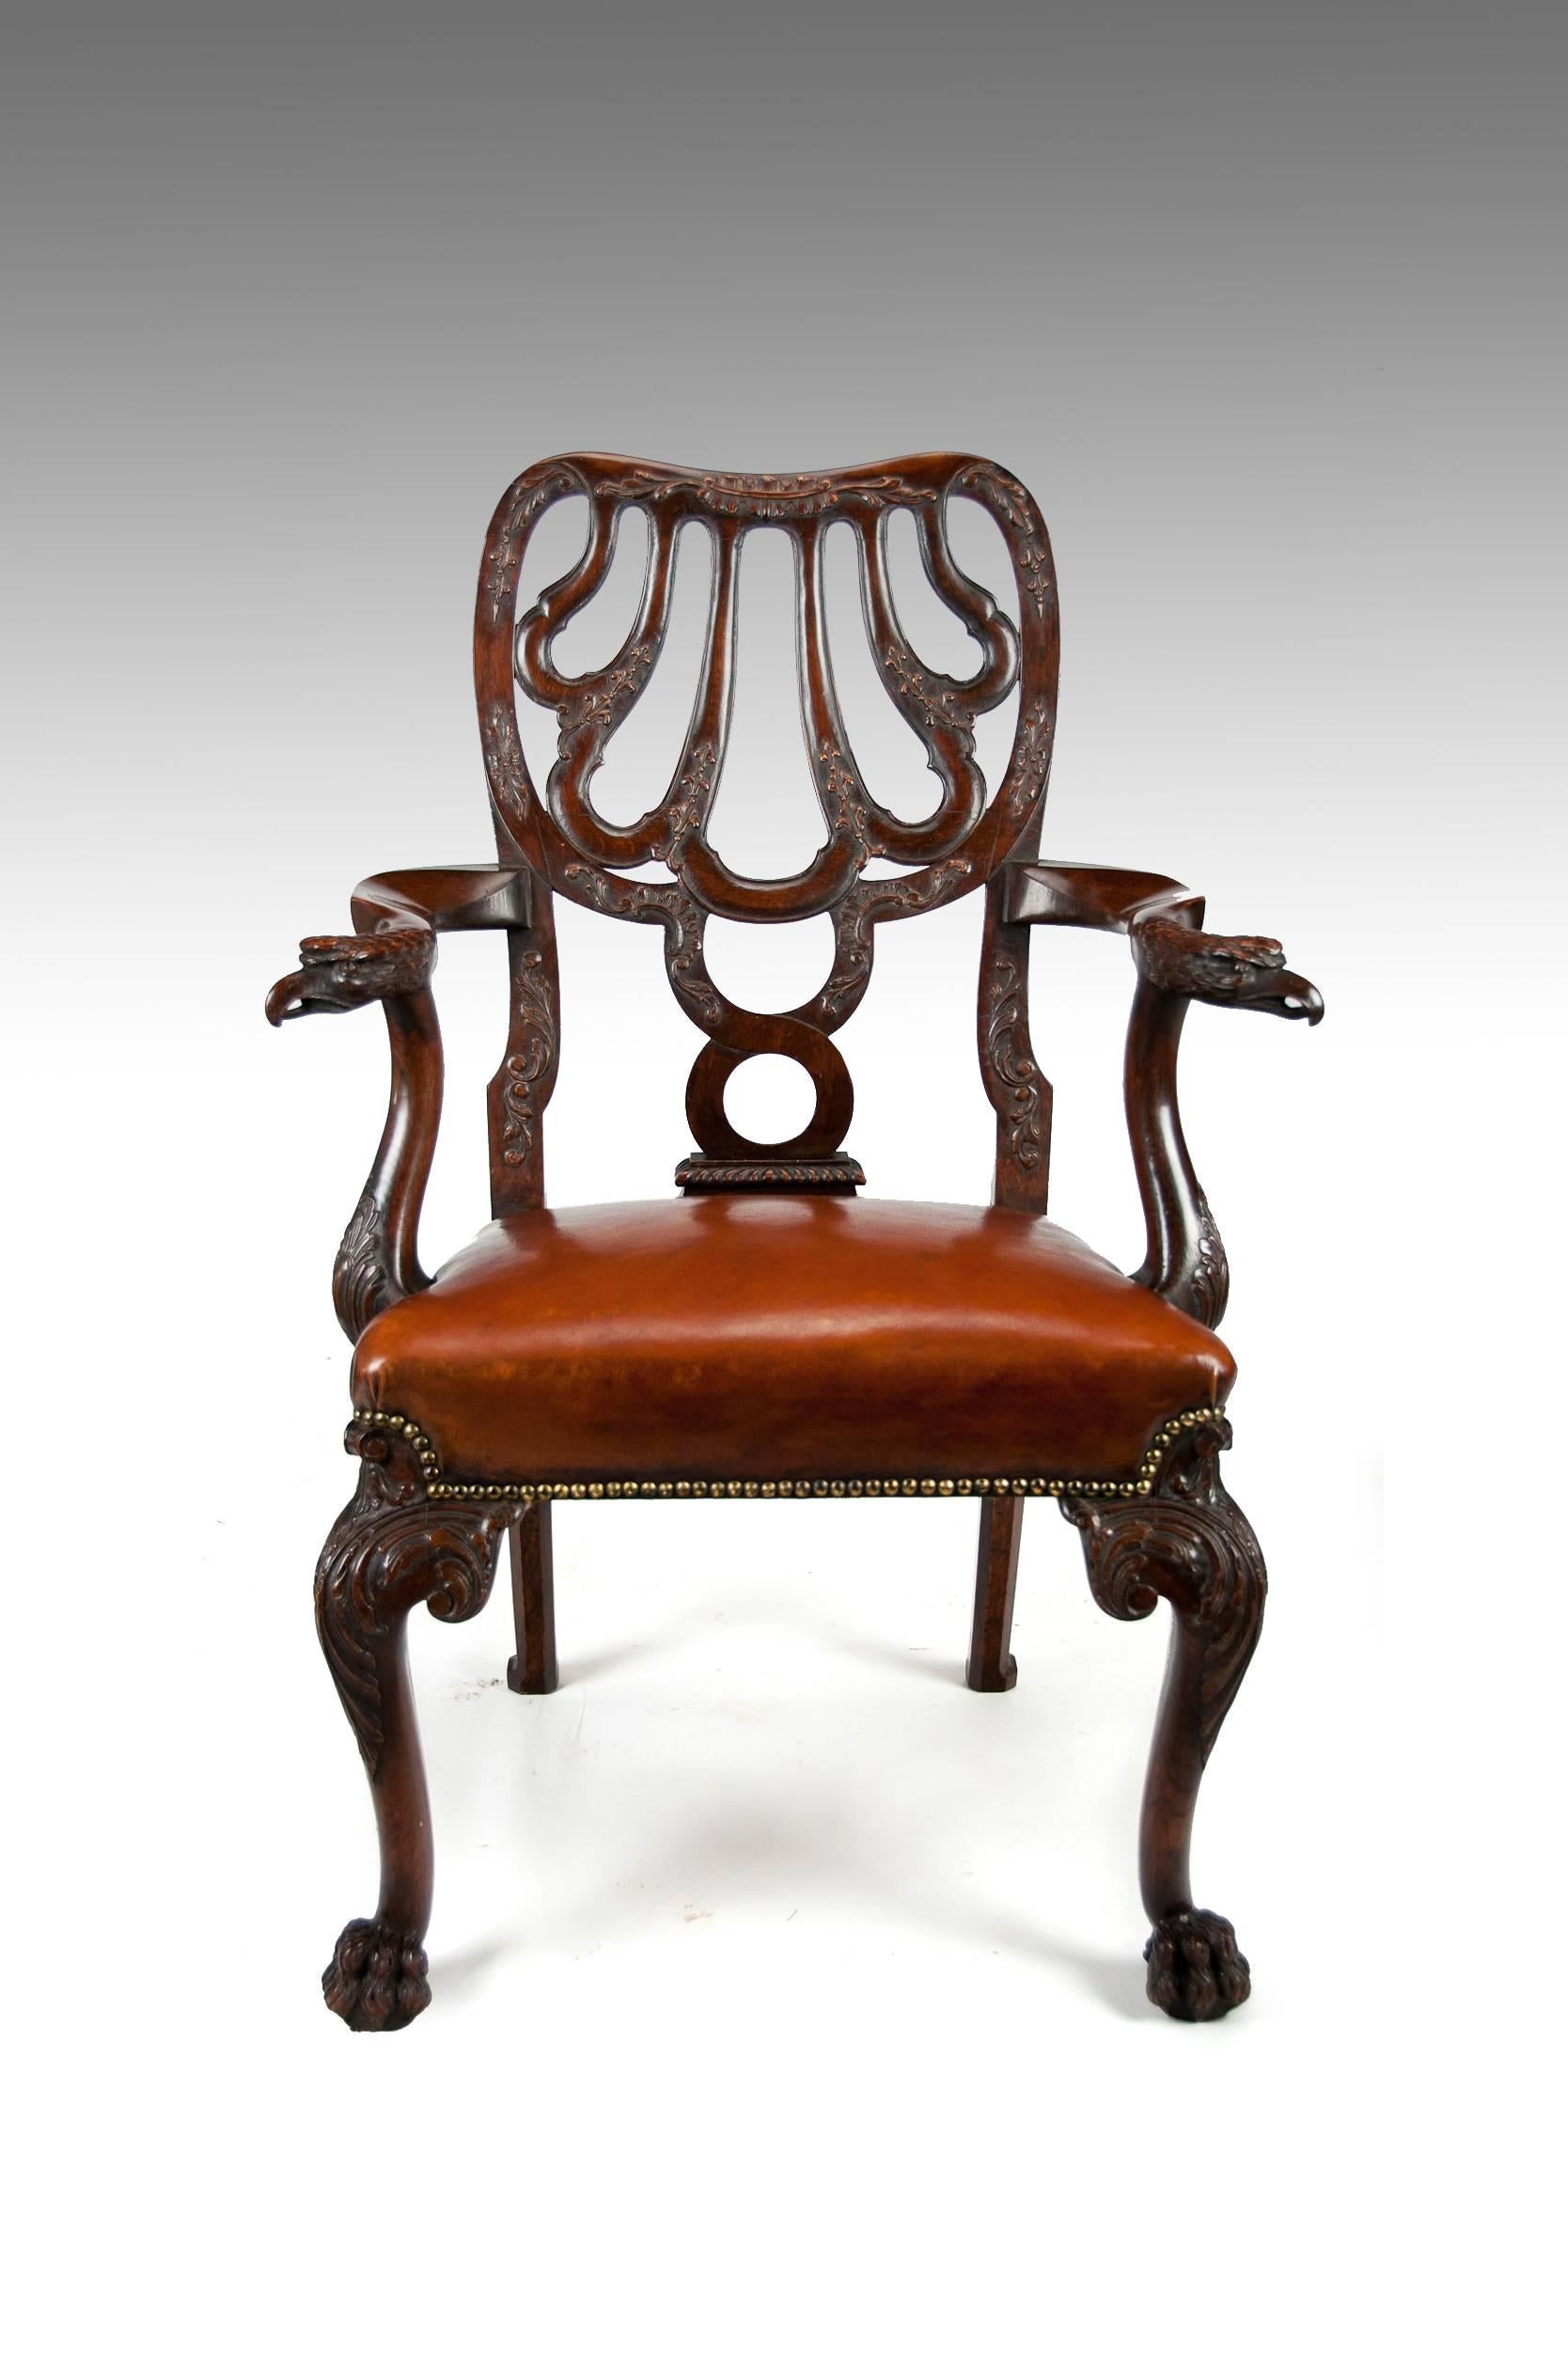 Georgian Fine Quality Leather Upholstered Desk Chair after a Design by Giles Grende